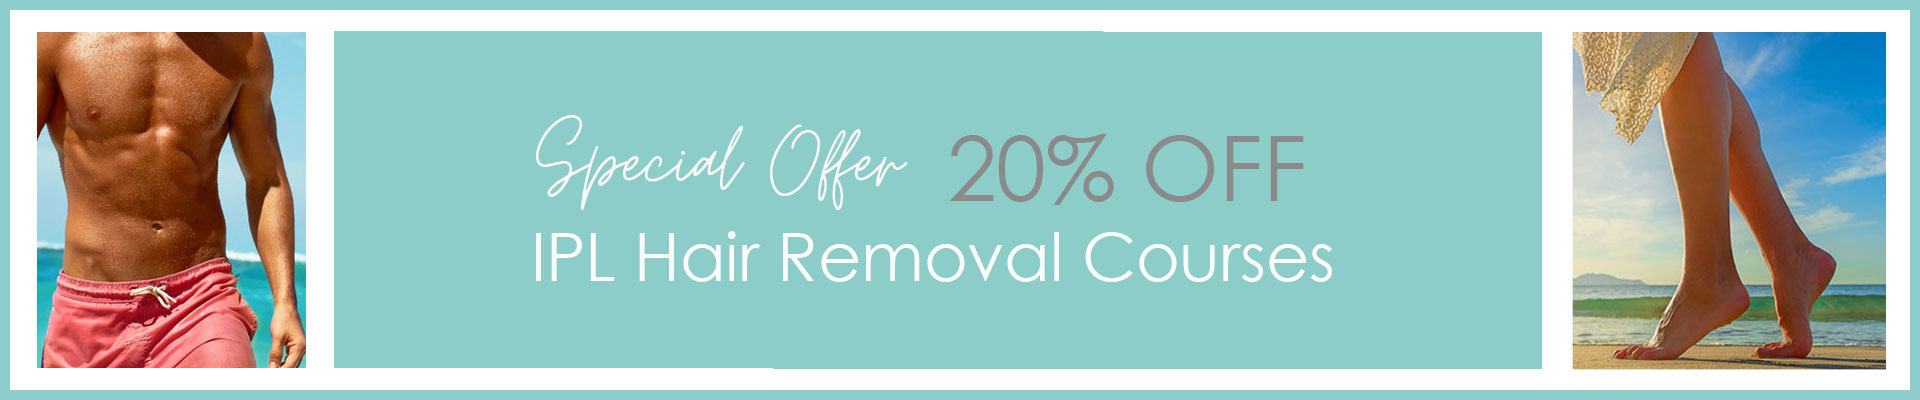 special offer 20 OFF IPL Hair Removal at Skin Clinic at Urban Spa in Bishops Stortford